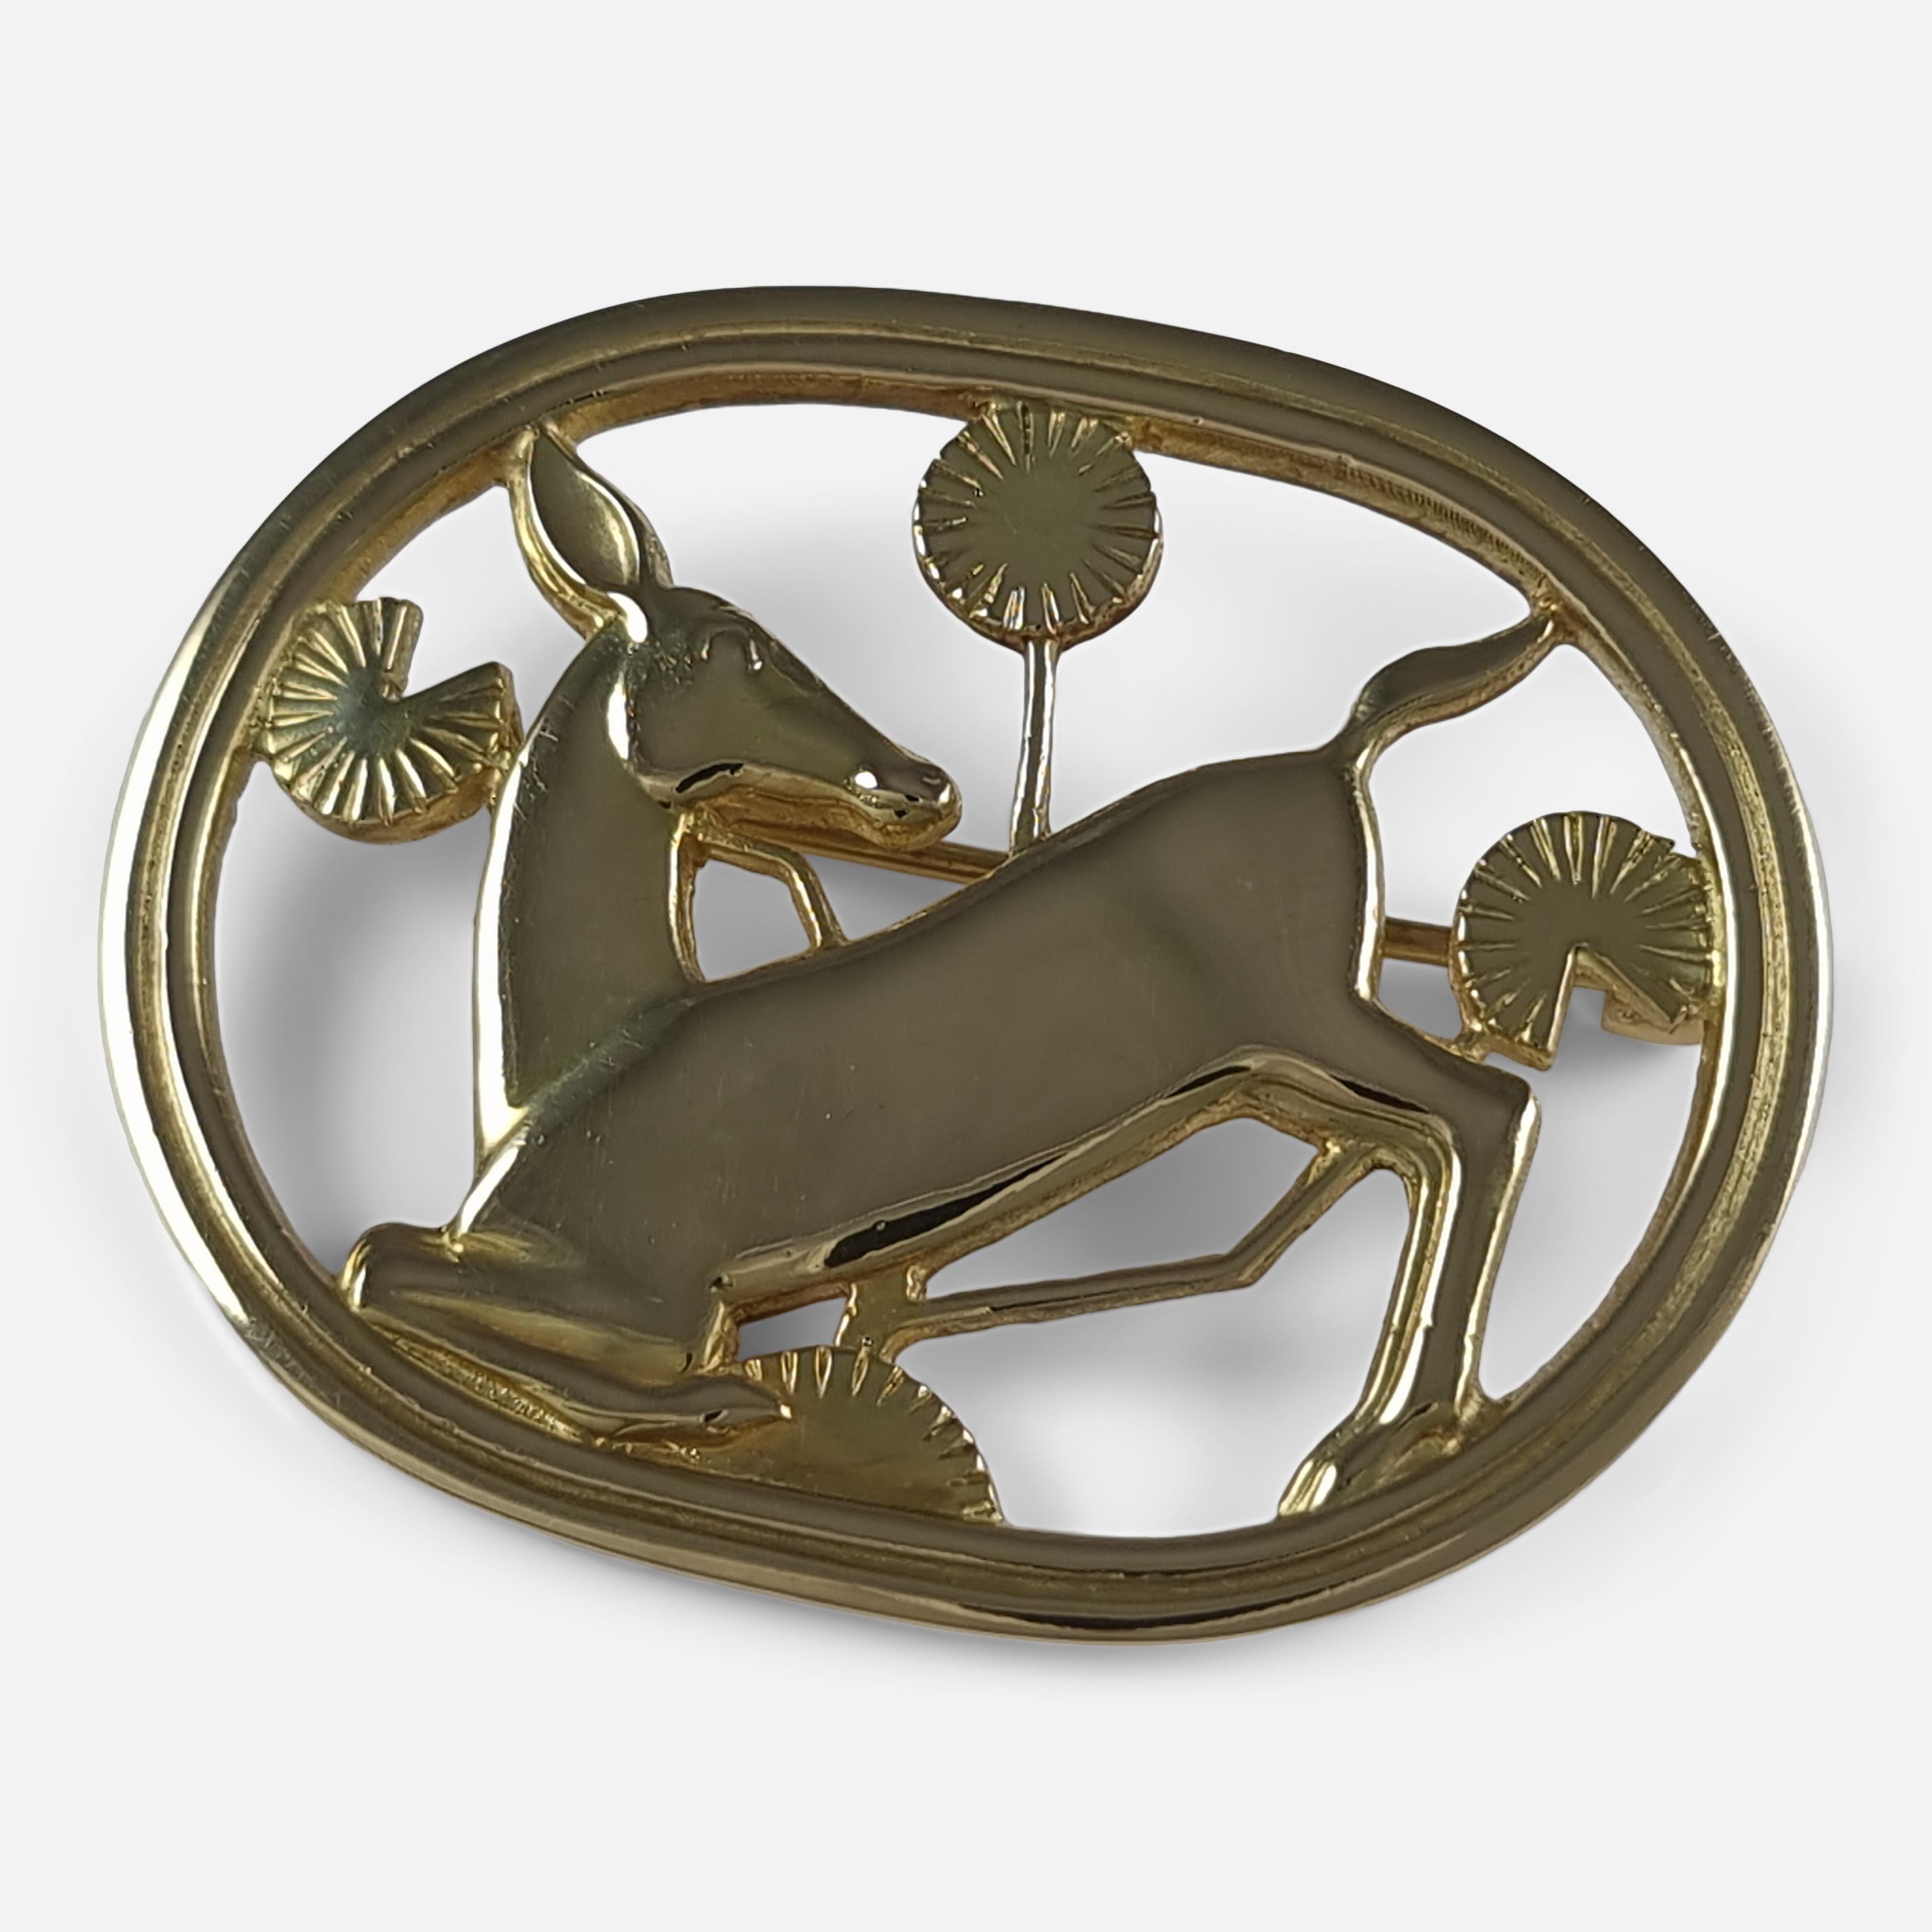 An 18ct yellow gold kneeling fawn brooch #343, designed by Arno Malinowski for Georg Jensen.

The brooch is stamped with the Georg Jensen mark used since 1945, '18K', '765', & '343'. Also hallmarked with Edinburgh assay marks, and 